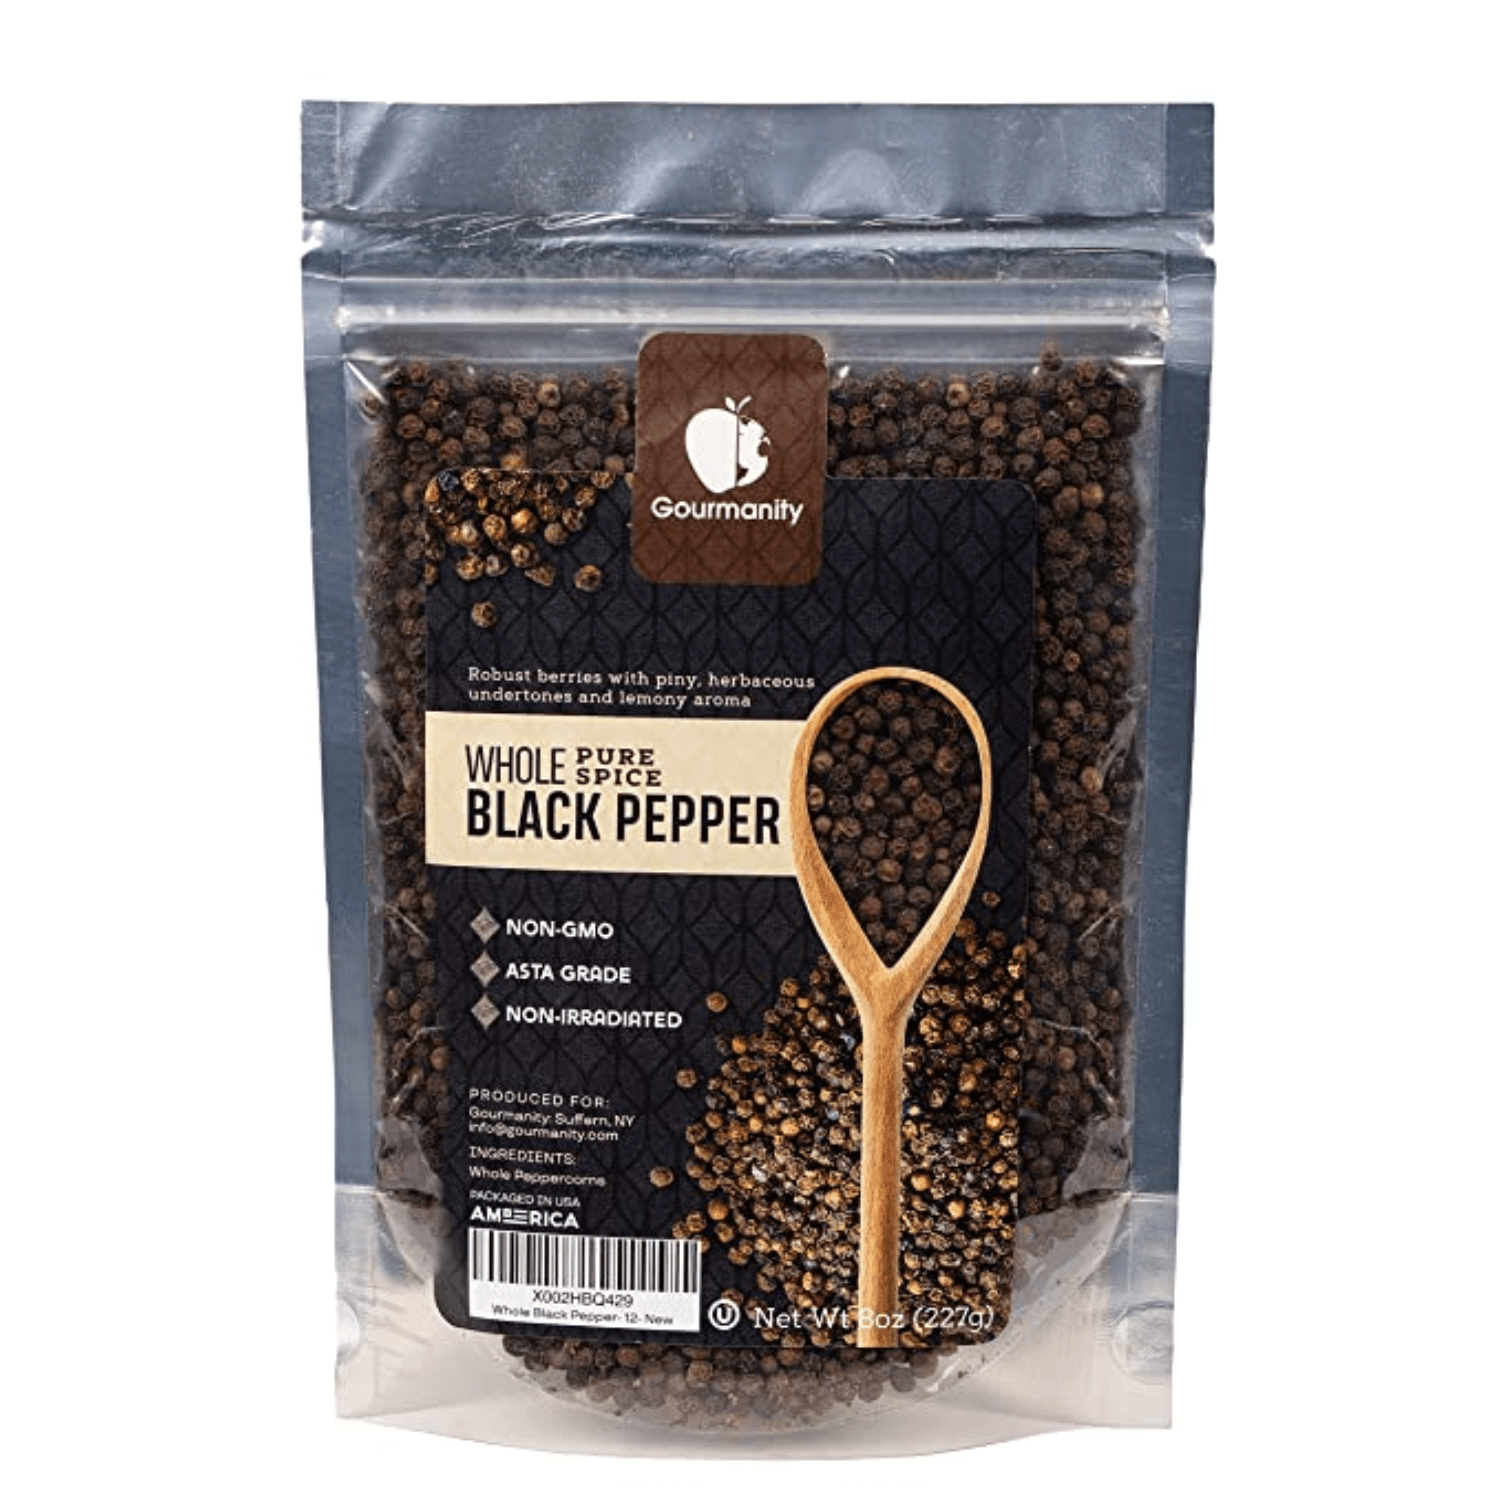 Gourmanity Whole Black Pepper - Gourmanity